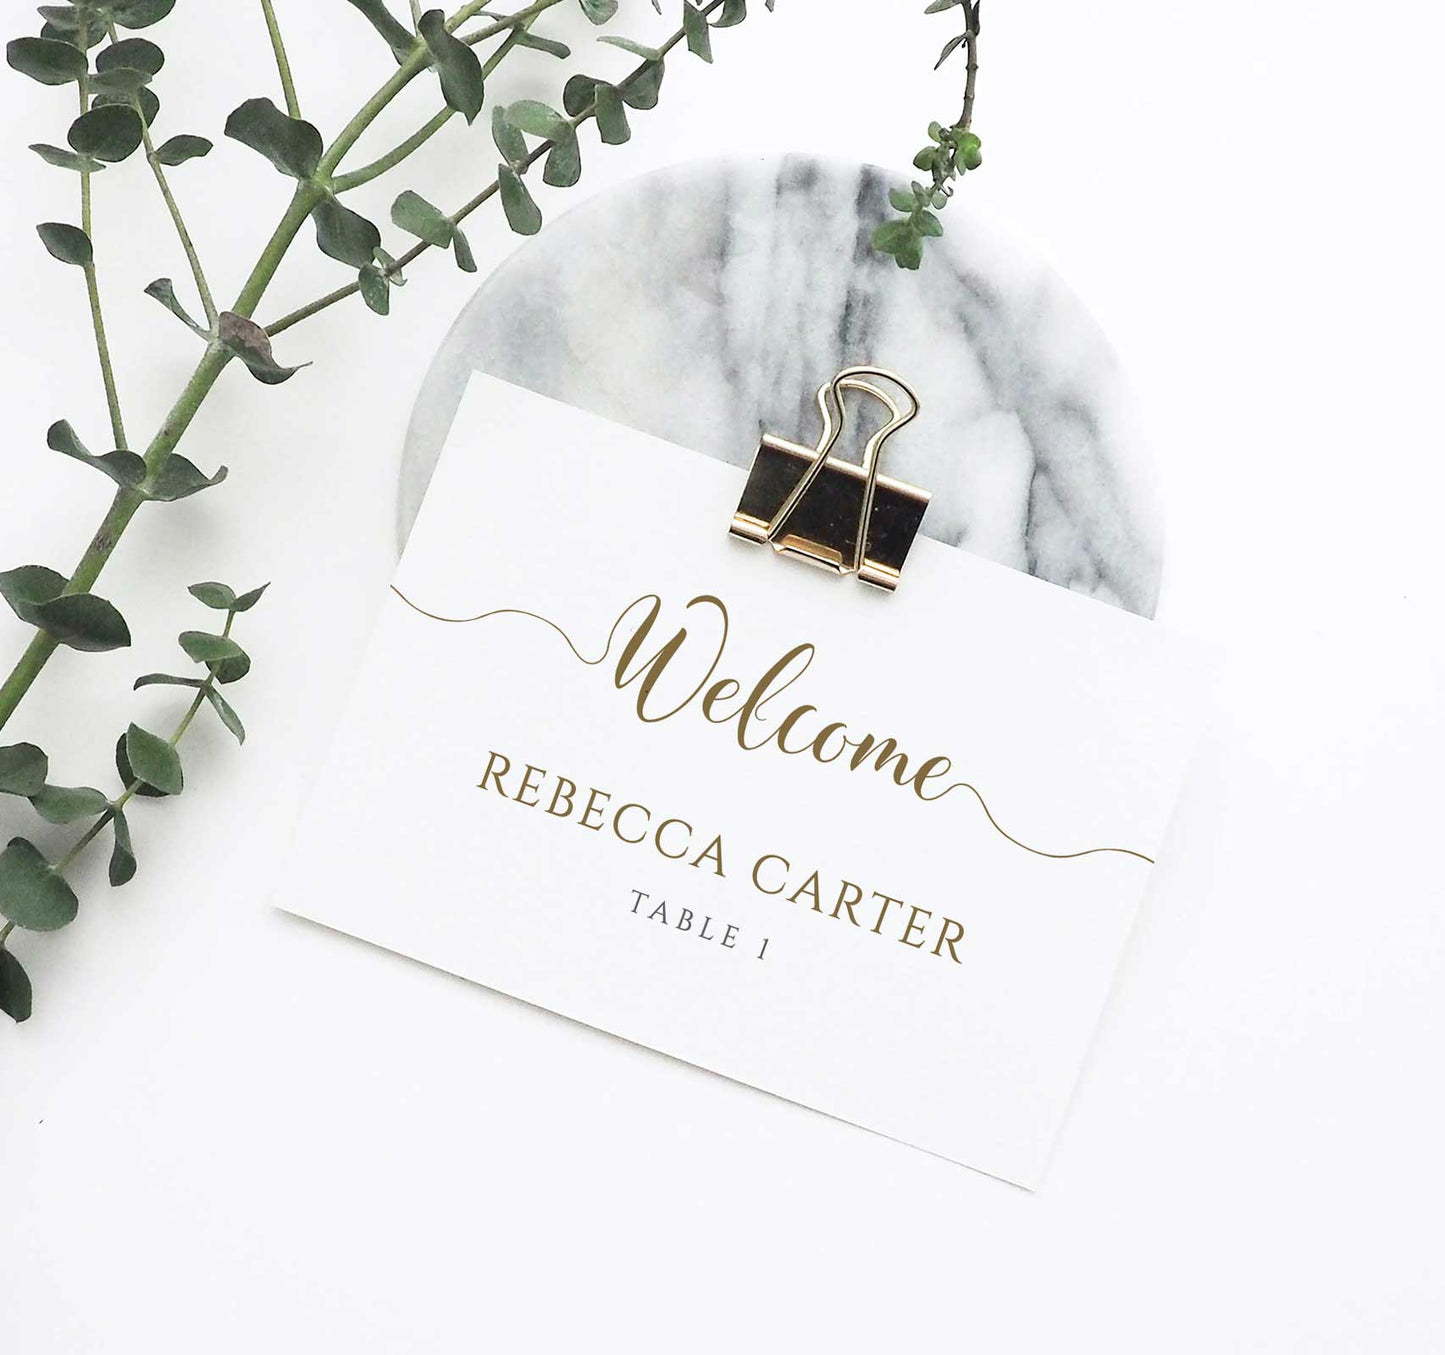 welcome place card with gold text on wedding table